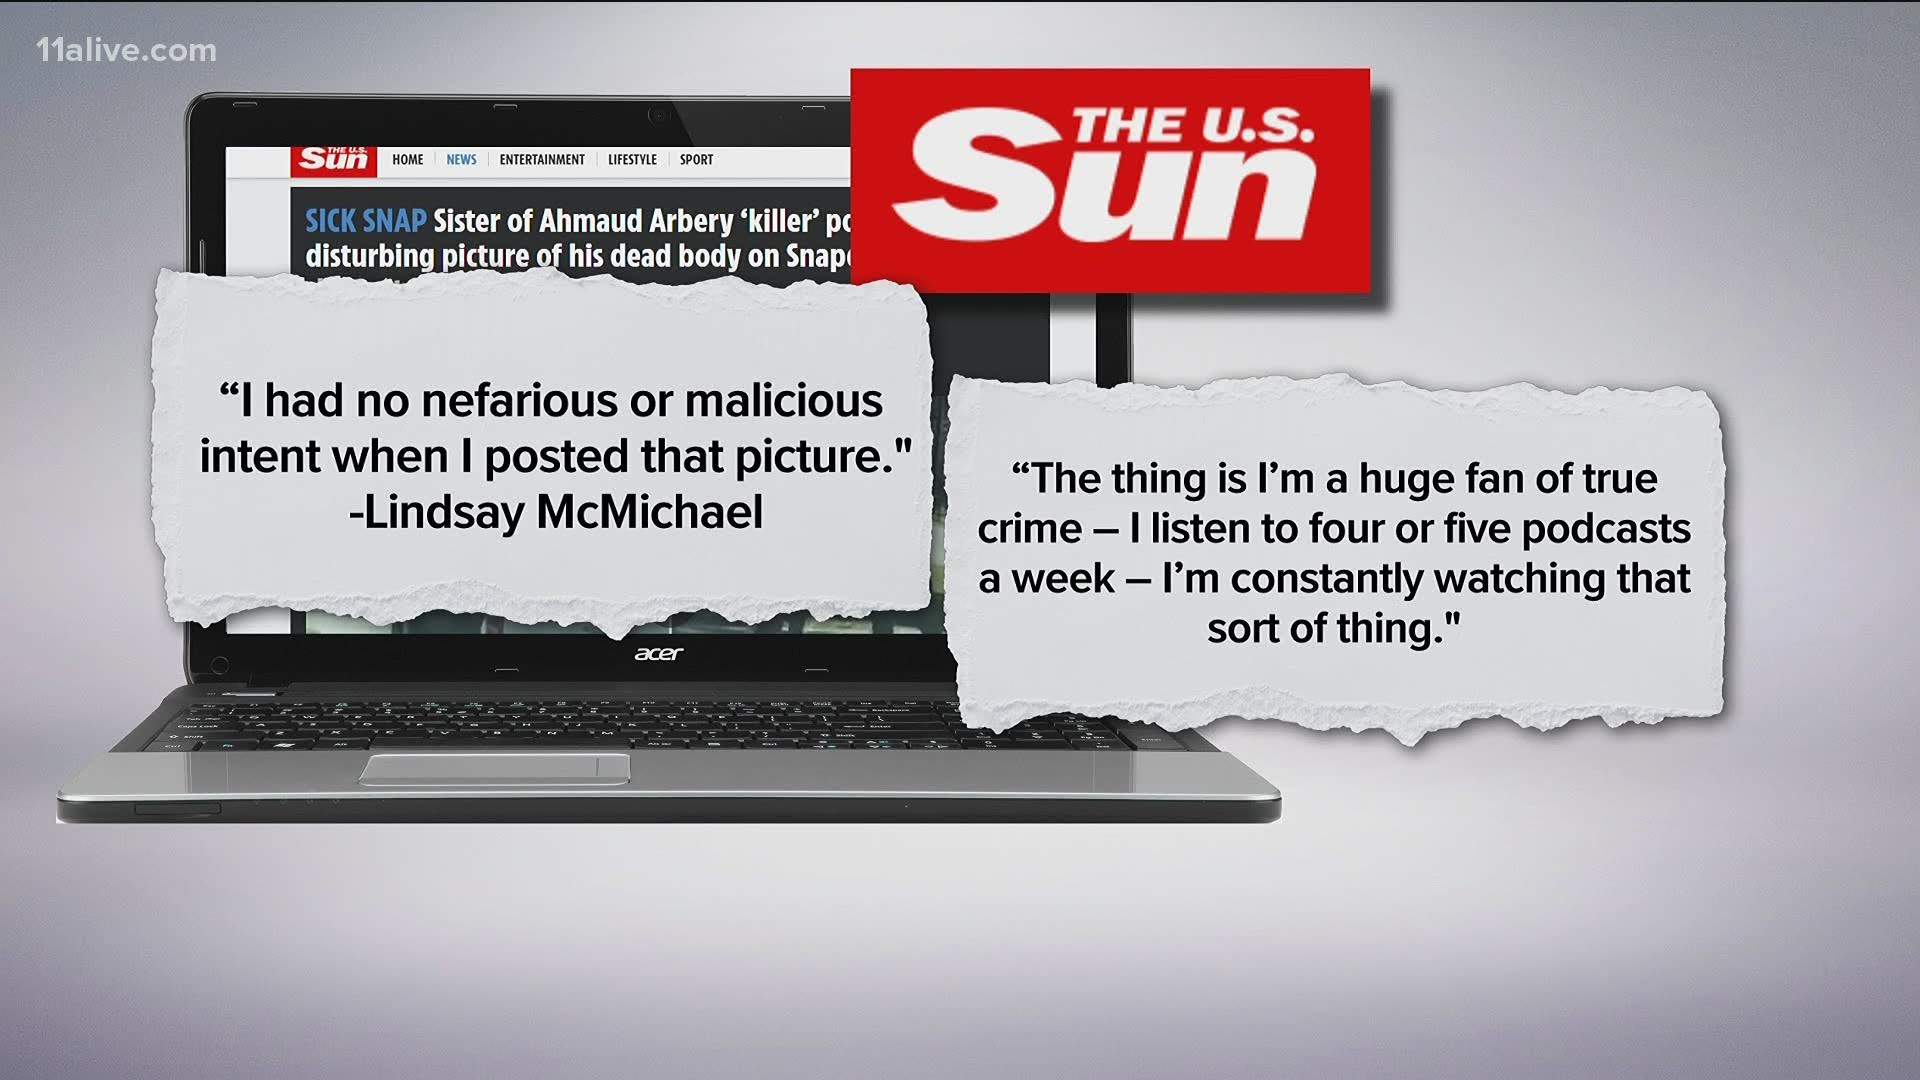 The UK-based publication reports that Lindsay McMichael posted a picture of Ahmaud Arbery’s body because she is a “true crime fan.”